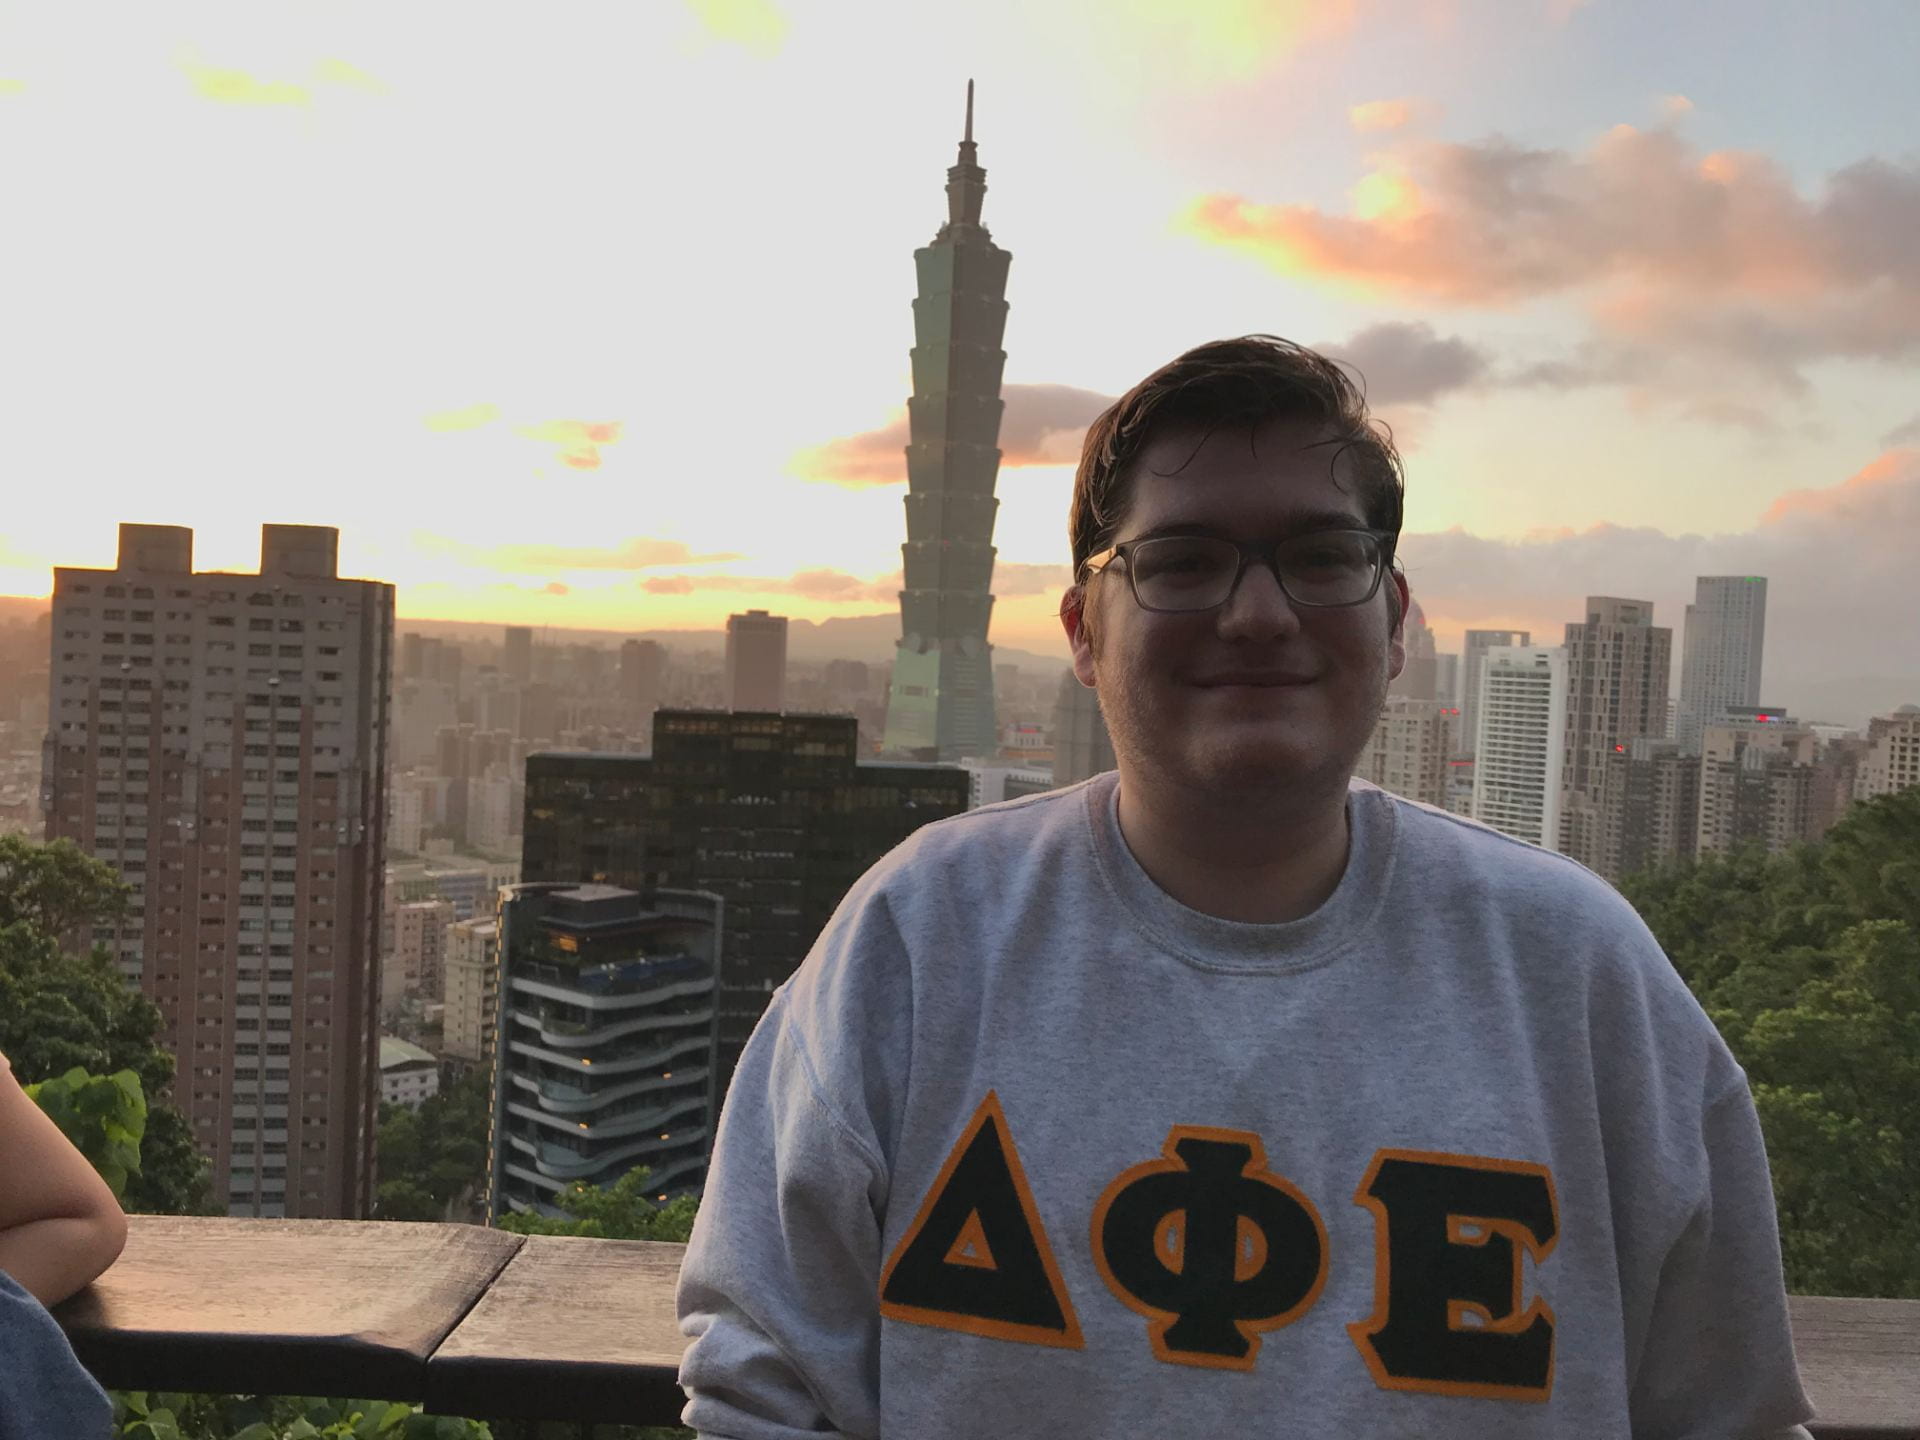 Sigur language student poses in front of skyline of Taiwan